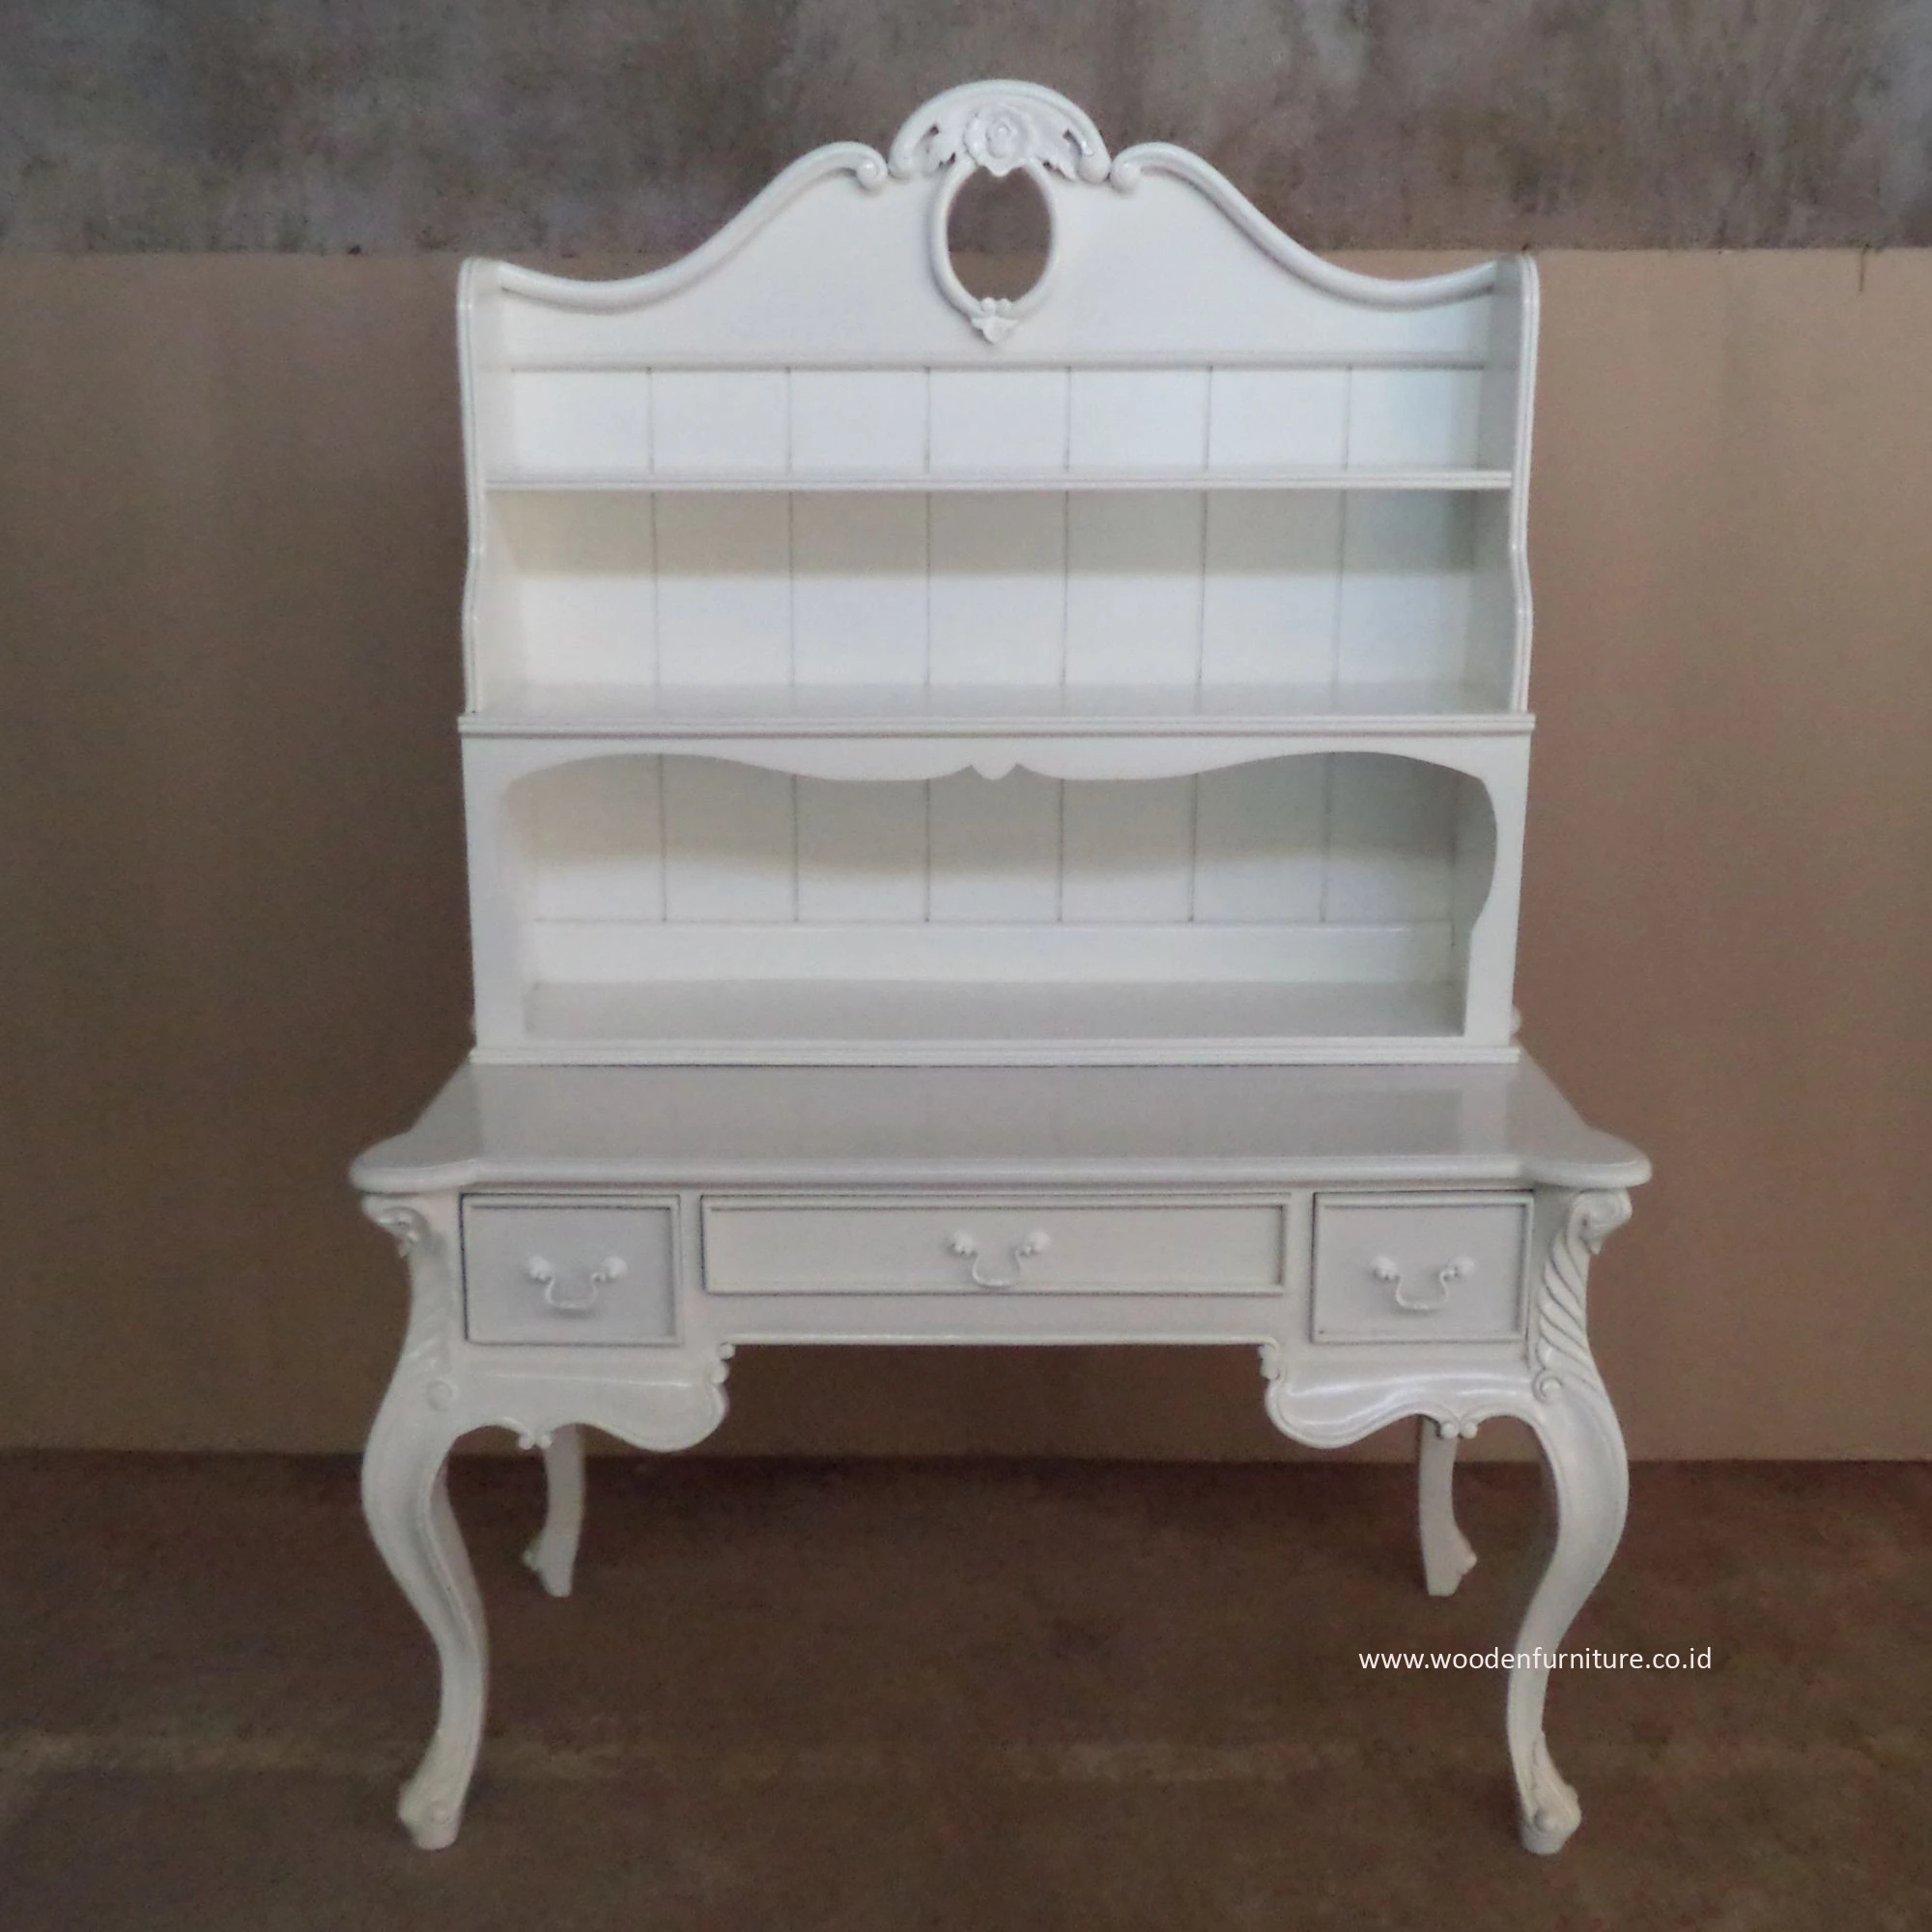 Vintage Desk White Painted Book Shelves Antique Reproduction Study Table French Style Office Furniture Classical Writing Table